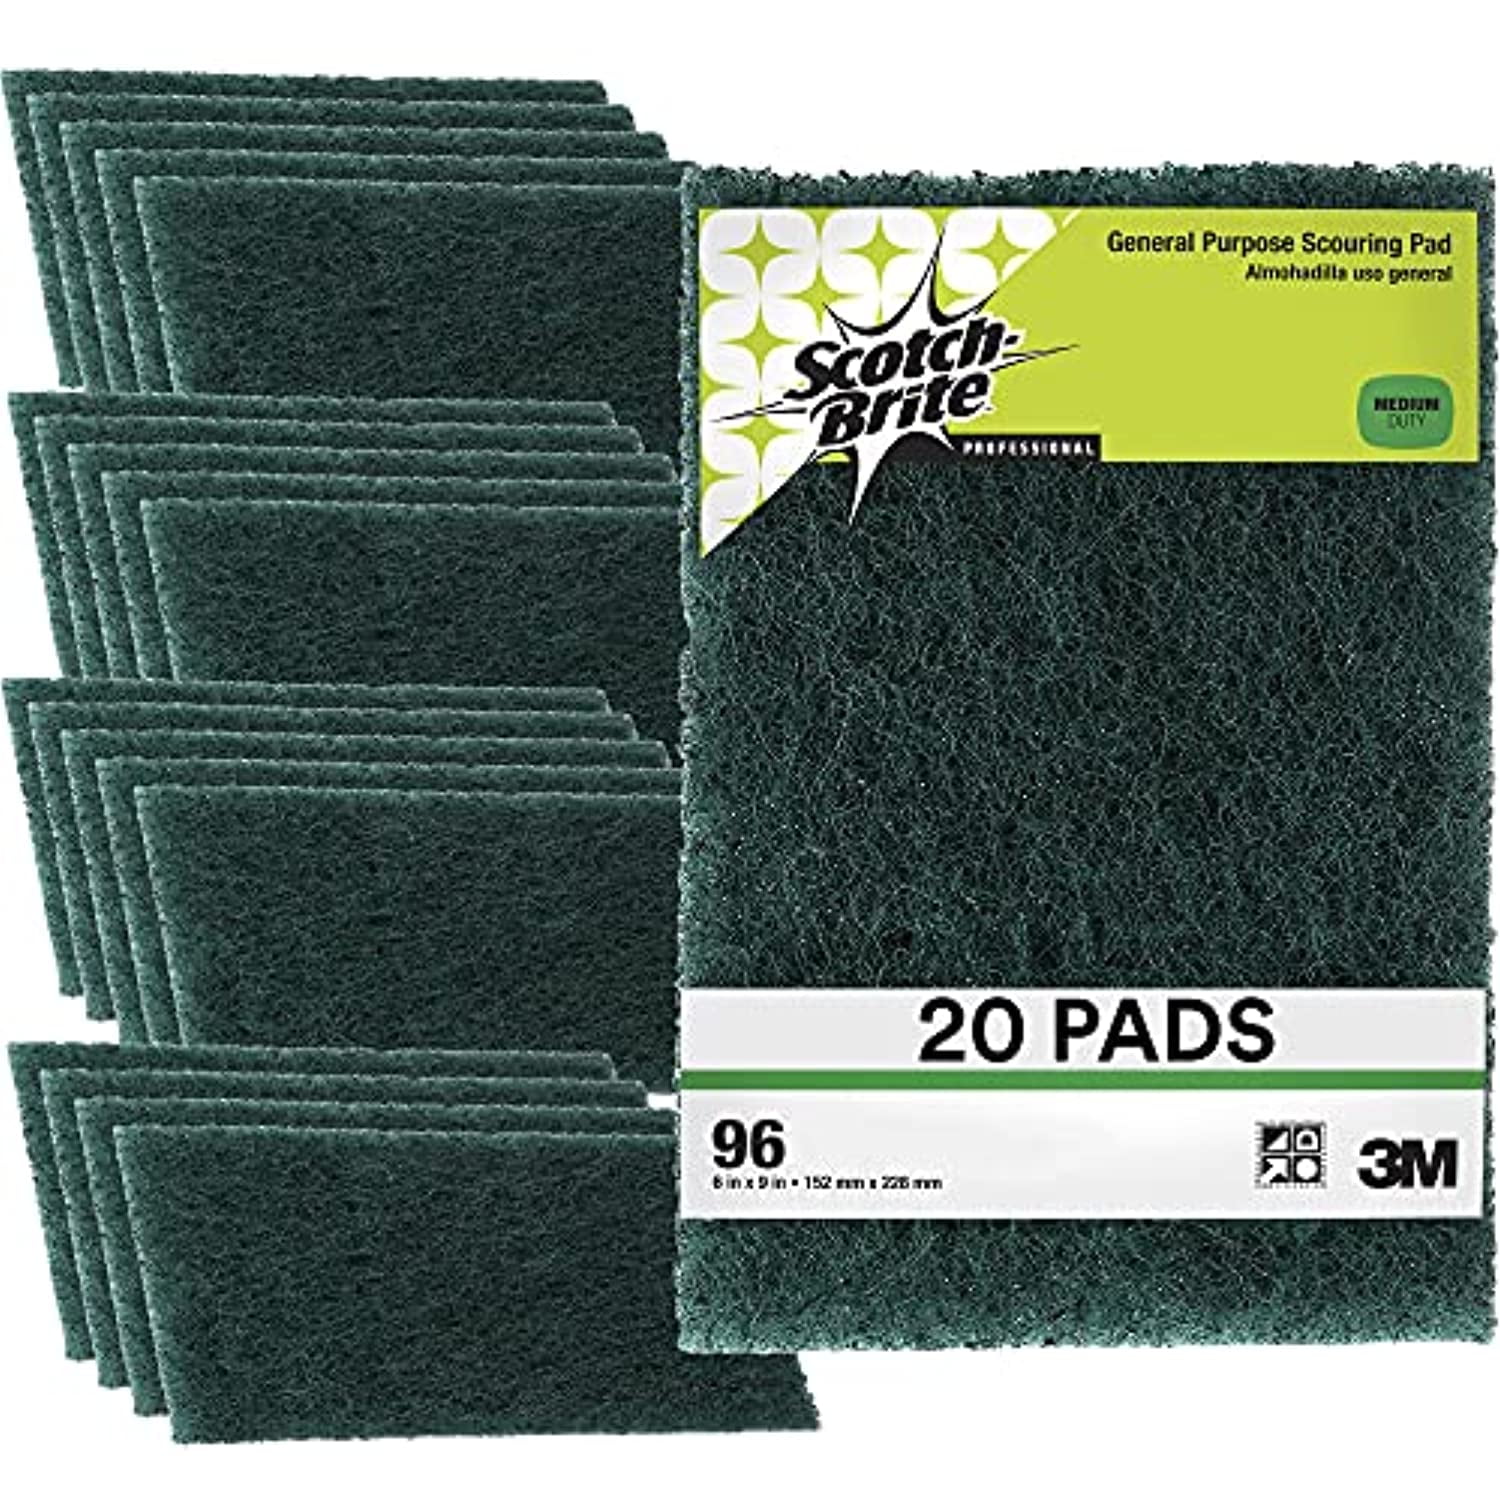 Scotch-Brite Scouring Pad 96-20 20 Pads 6” x 9” General Purpose Cleaning Food... 